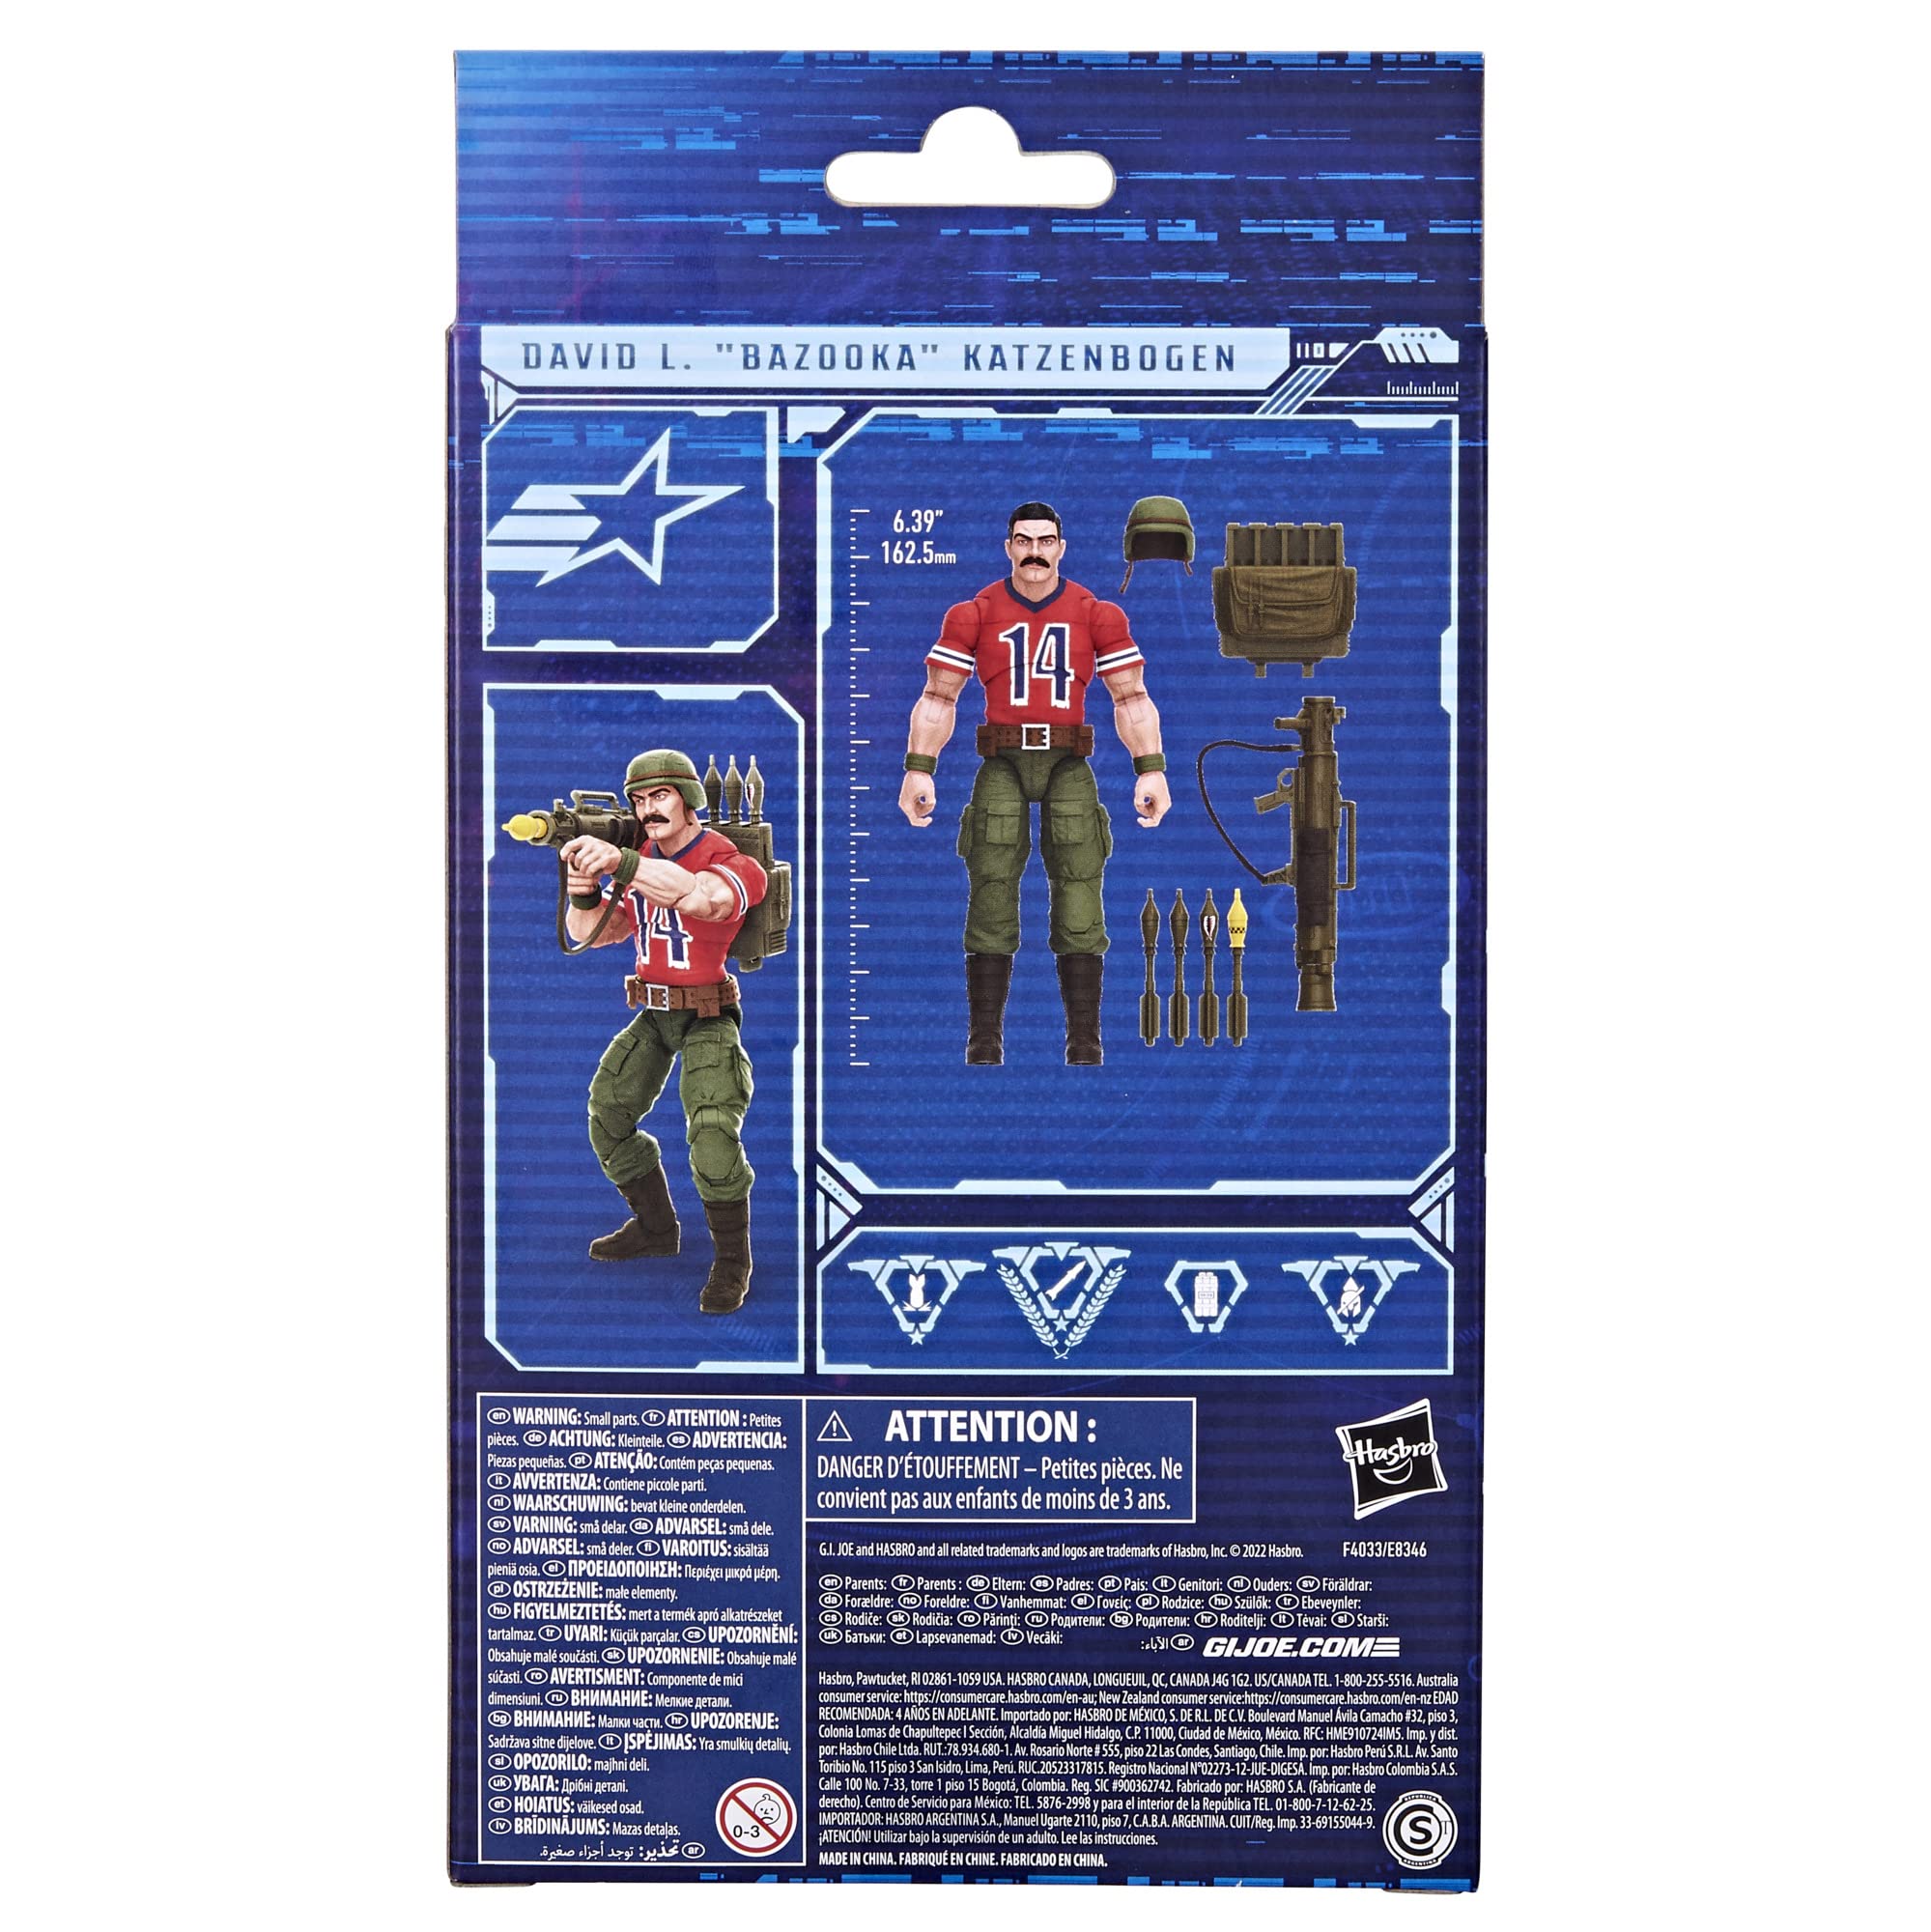 G.I. Joe Classified Series David L. Bazooka Katzenbogen Action Figure 62 Collectible Premium Toy with Accessories 6-Inch-Scale Custom Package Art